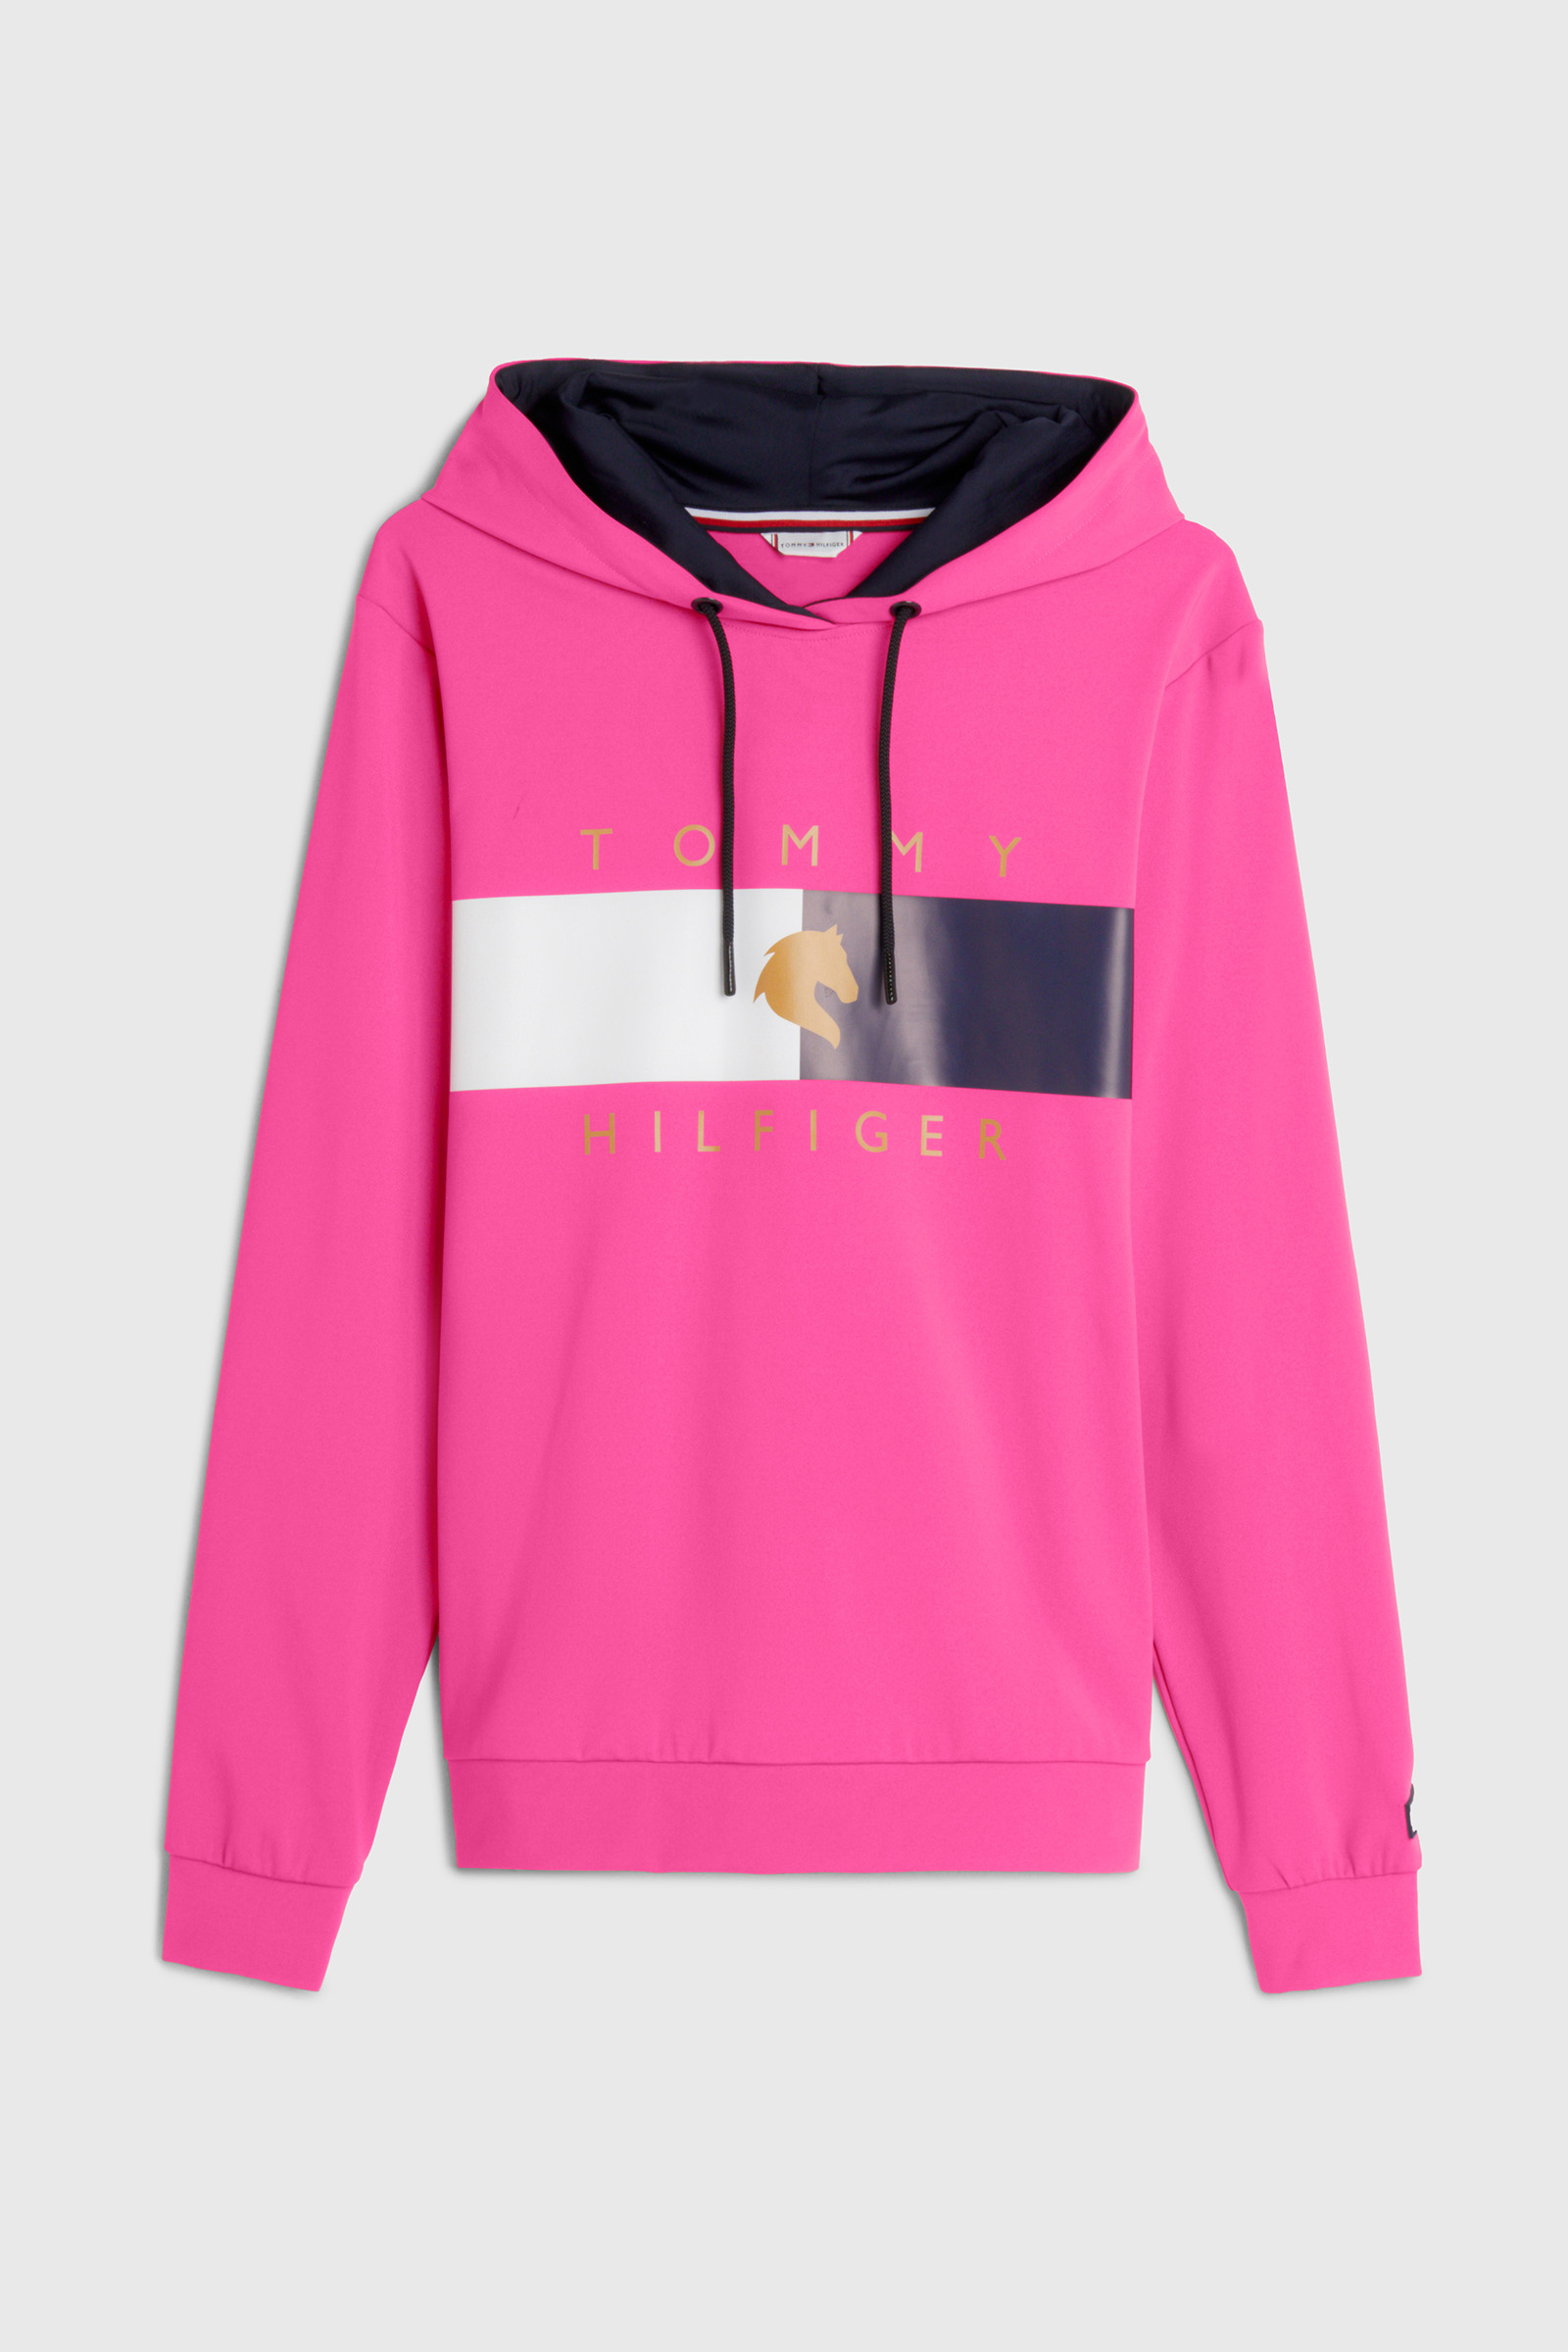 Buy Tommy Hilfiger Equestrian Tommy Flag Performance Women's Hoodie